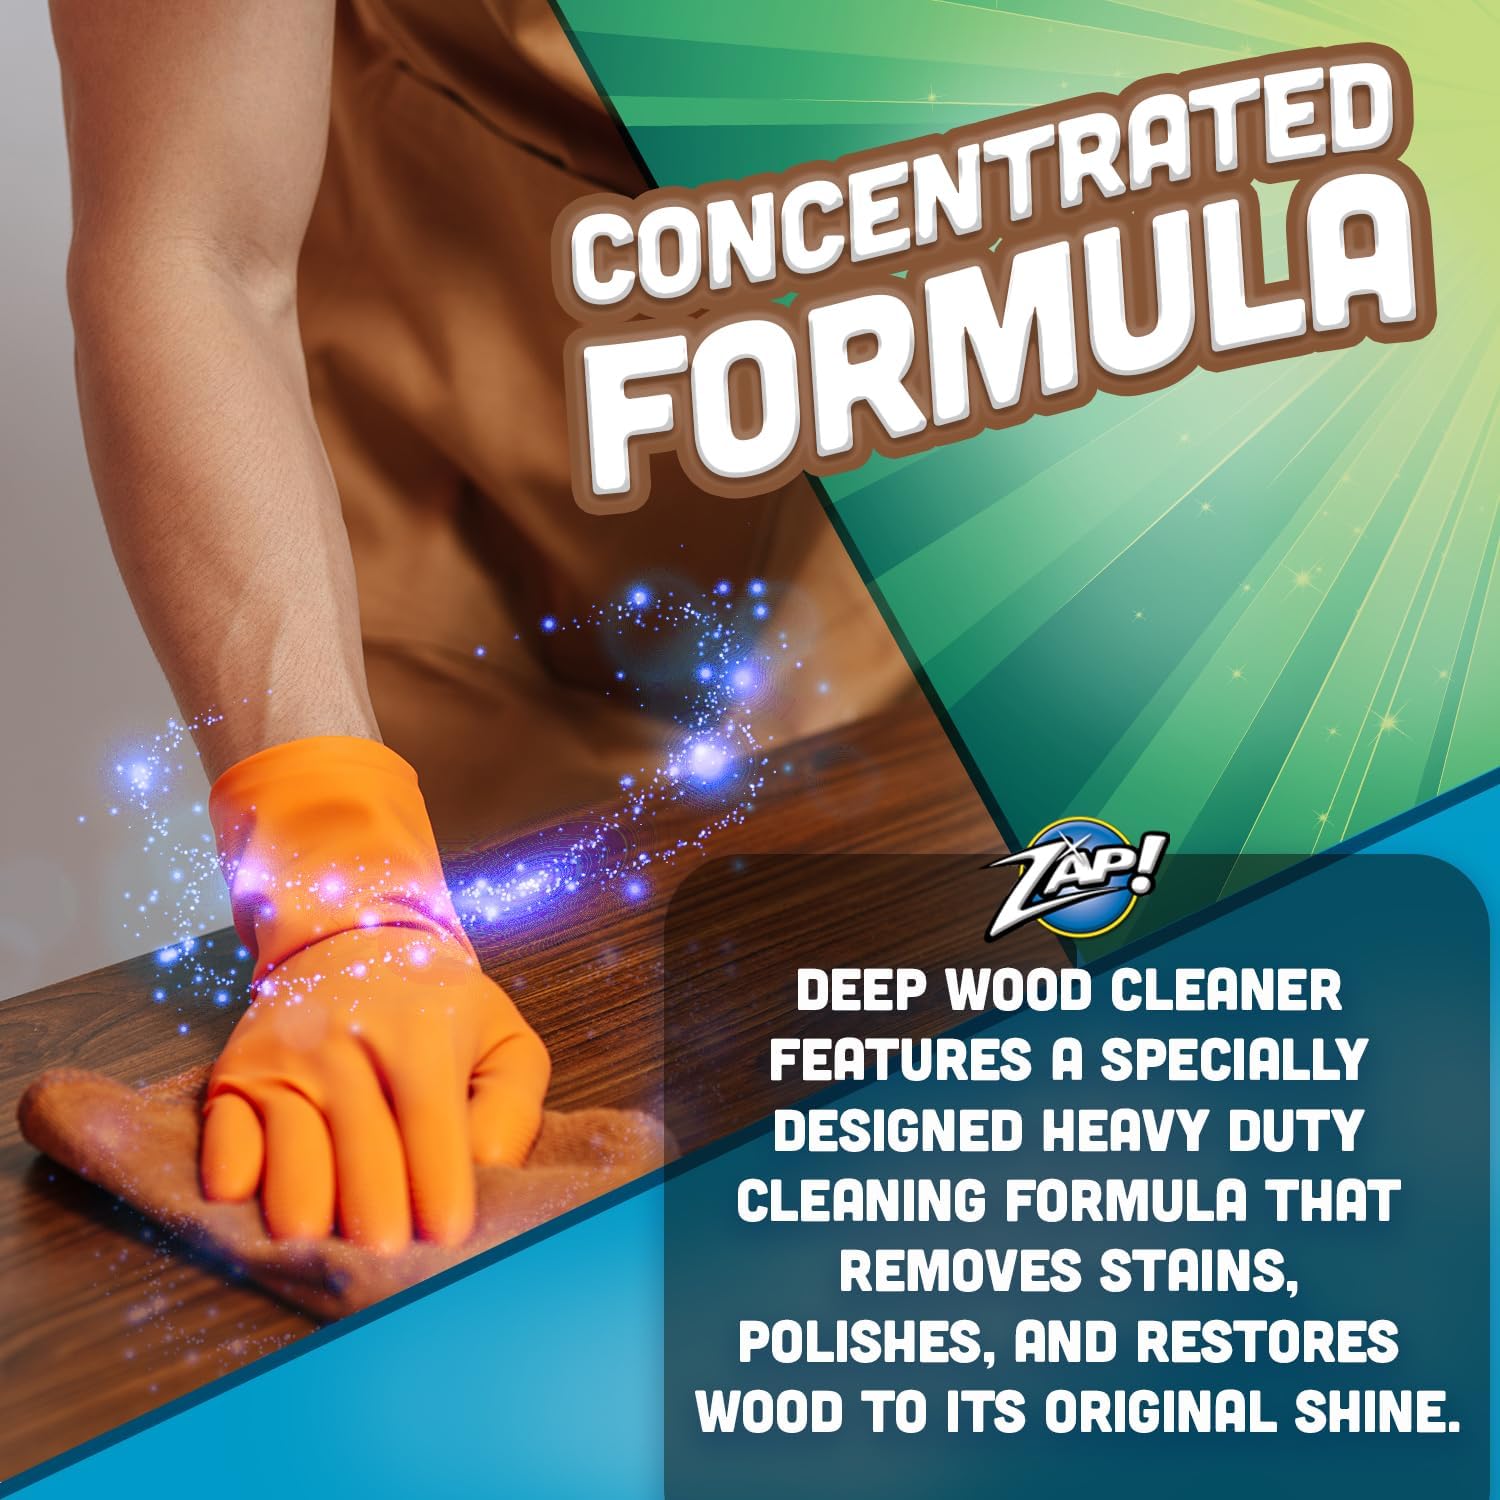 ZAP! Professional Wood Cleaner and Restorer | Clean, Polish, & Restore Wooden Furniture & Hardwood Floors | Kitchen Cabinet & Table | Deep Wood Cleaner for Heavy Duty Cleaning | 32 oz : CDs & Vinyl